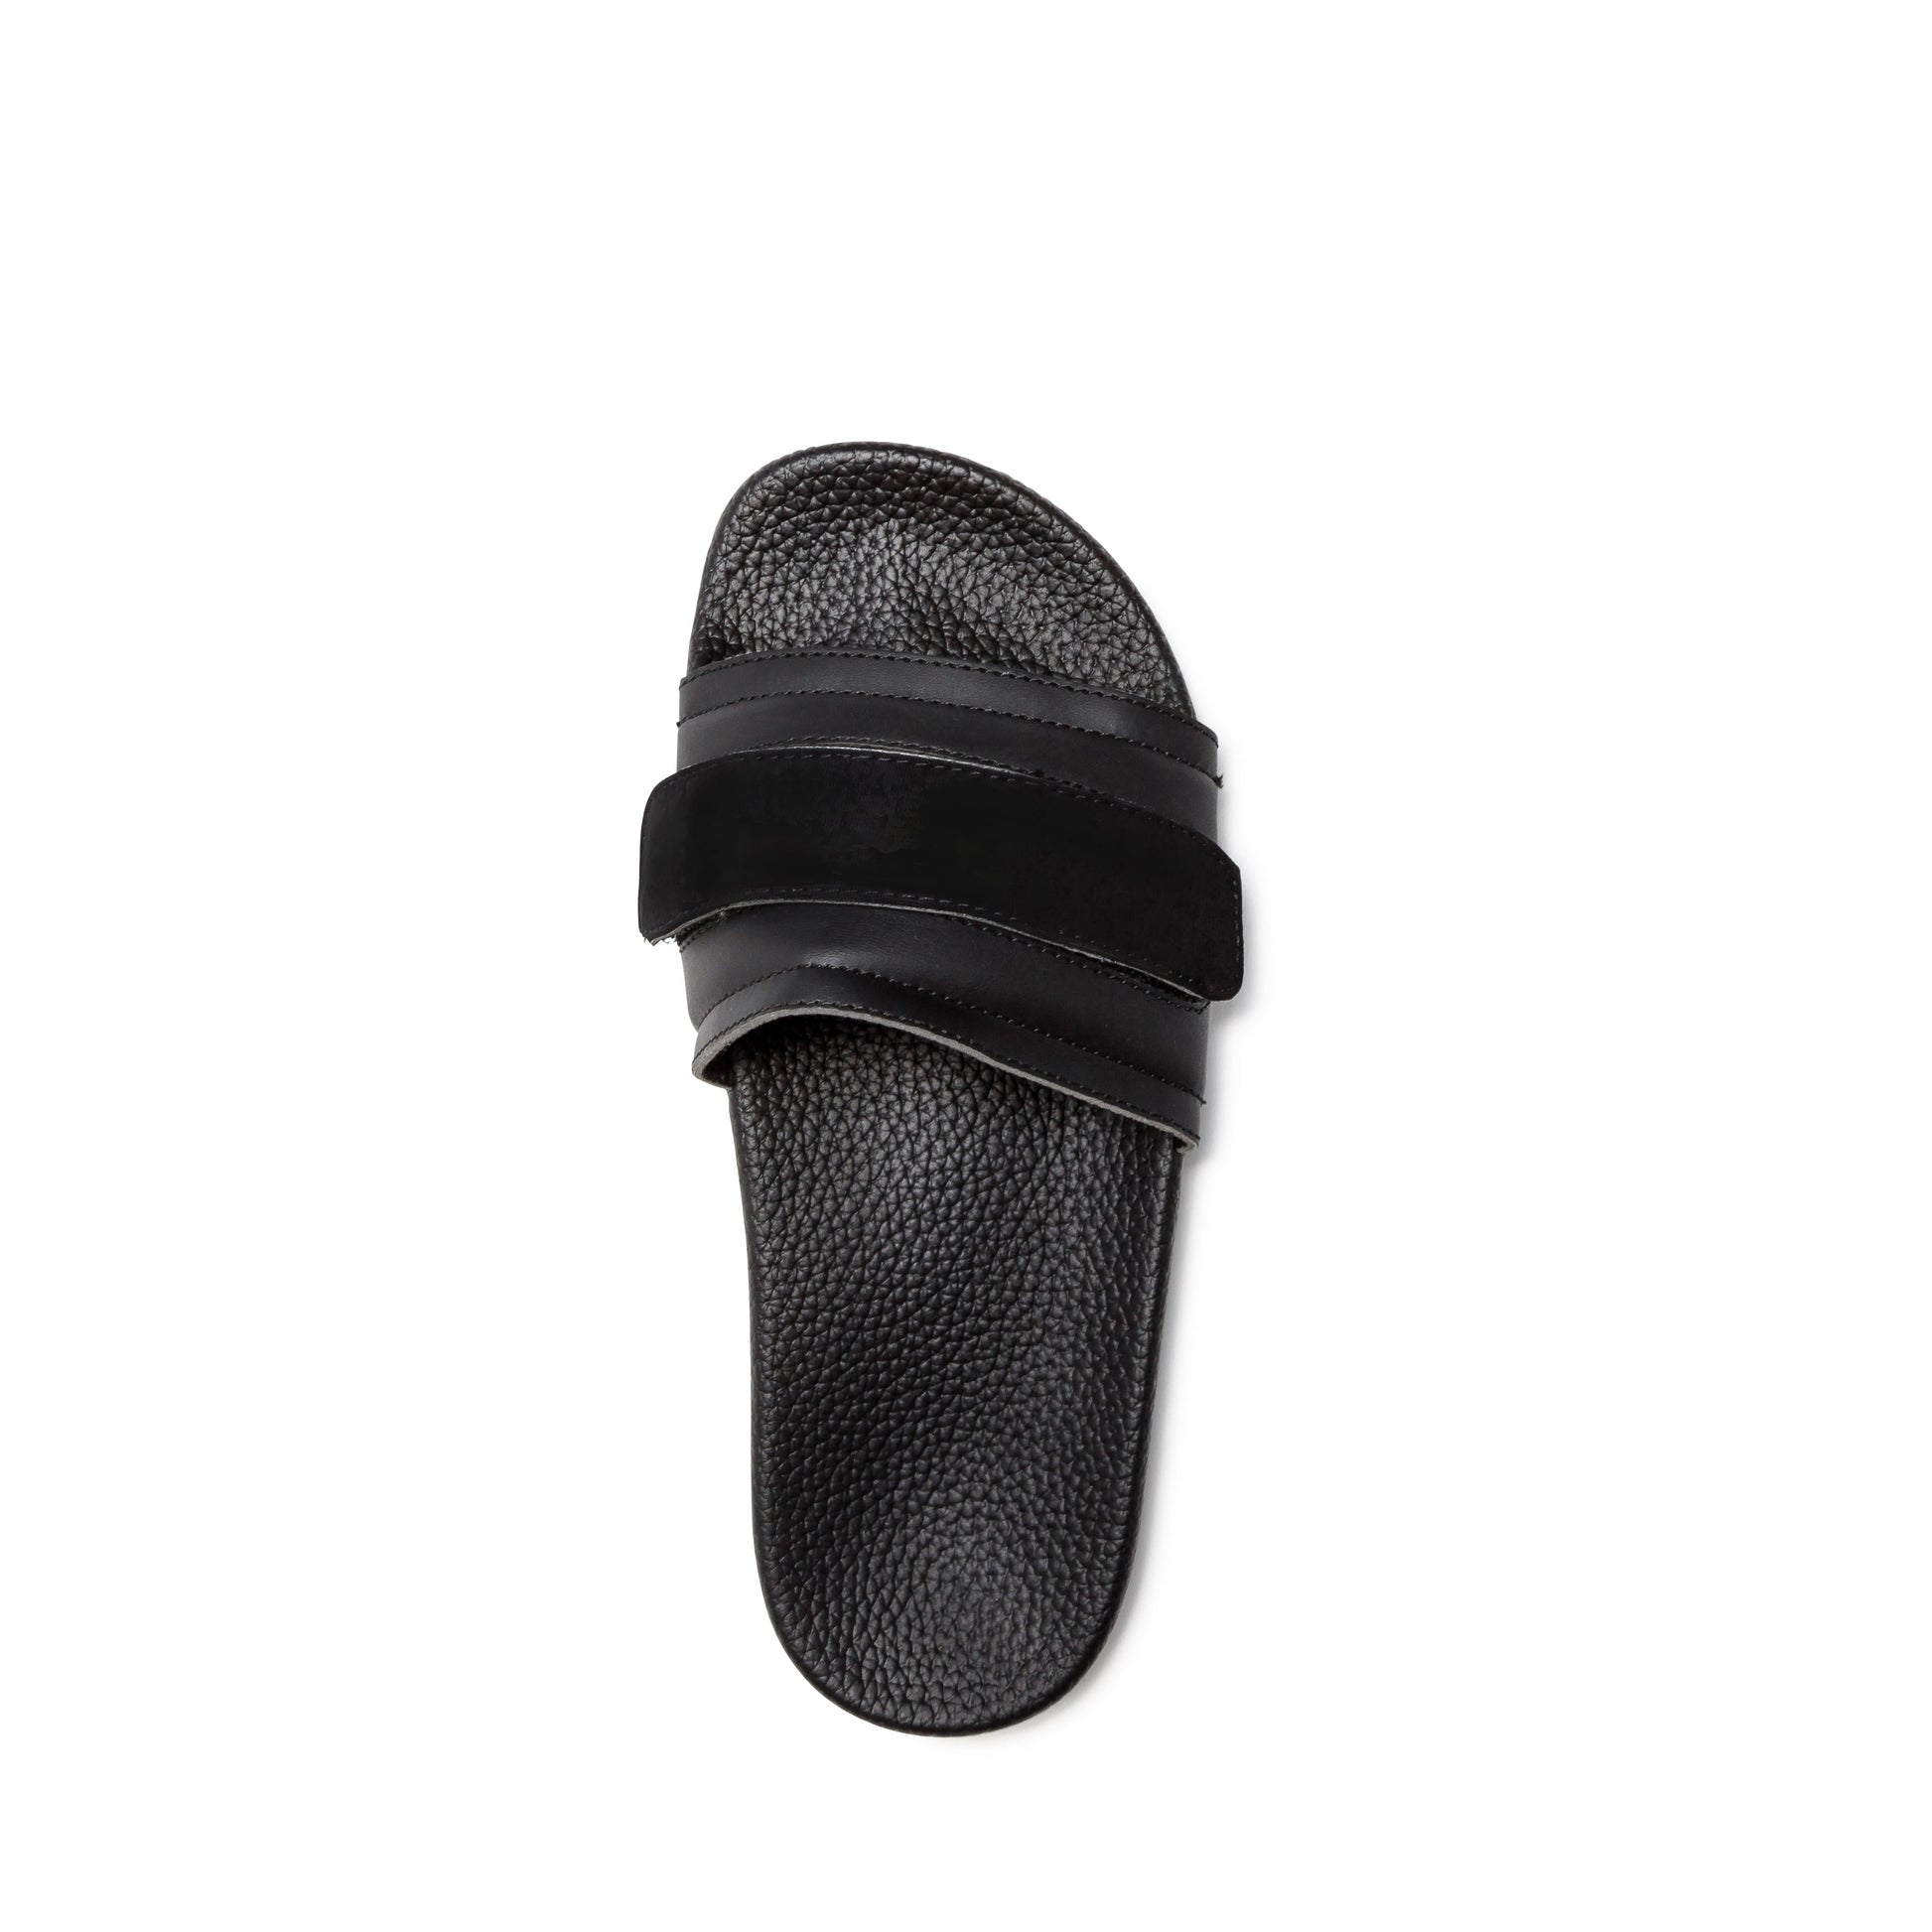 Pastry Recovery Slide with Strap Kit in Black